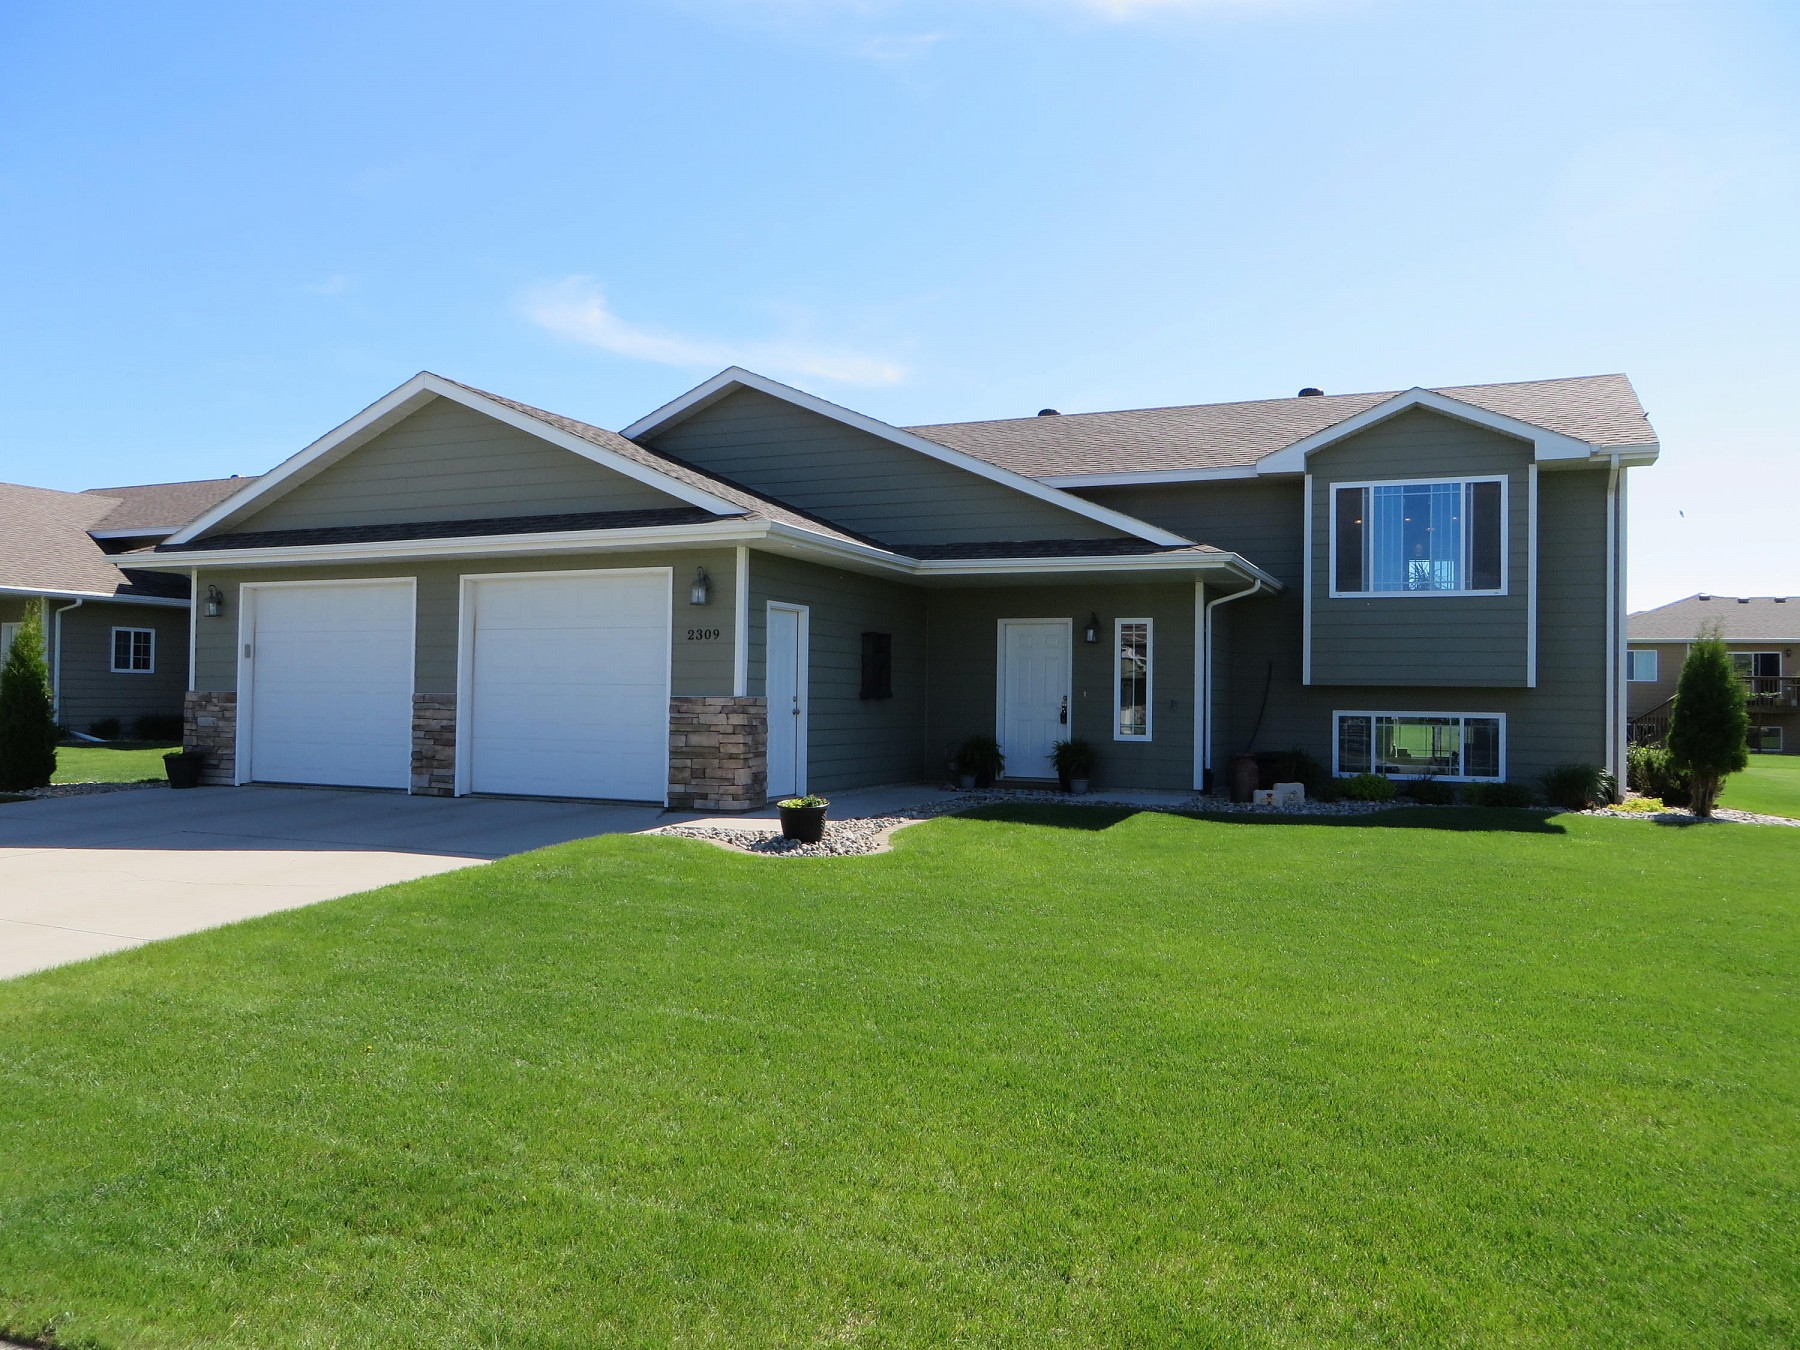 2309 16th Avenue S, Brookings, SD 57006